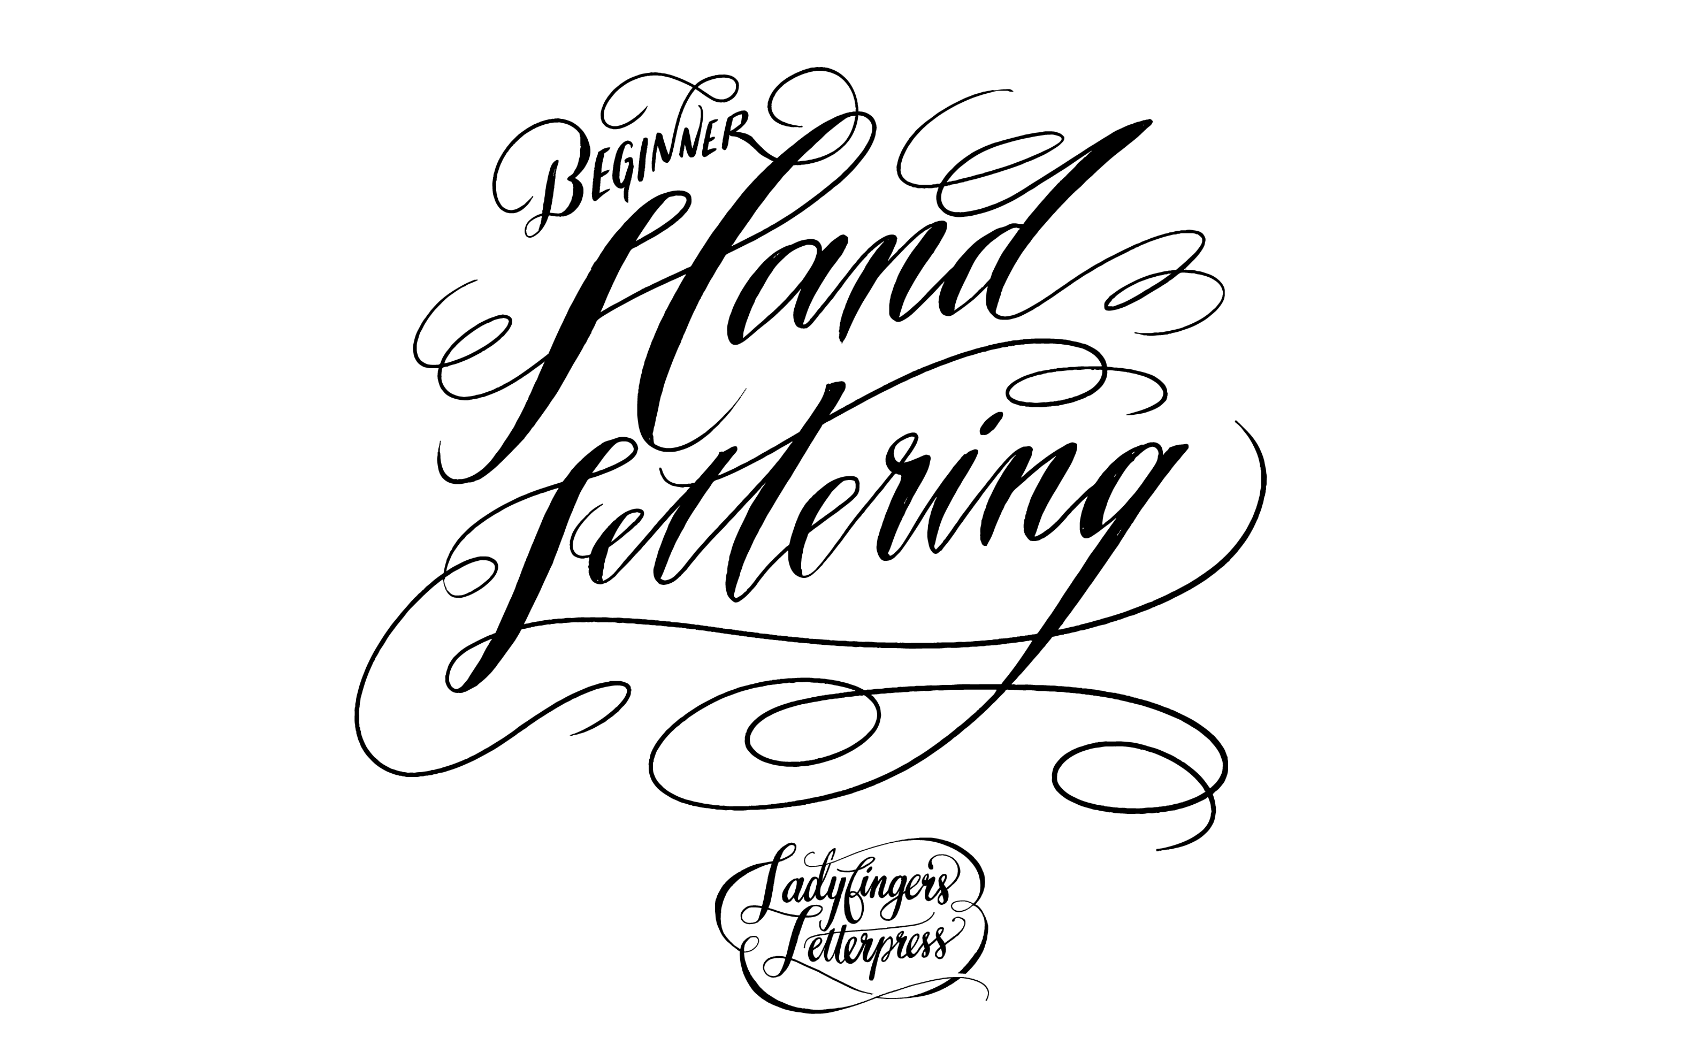 Hand-Lettering Line Guide (Blank) - Free Download - Ladyfingers